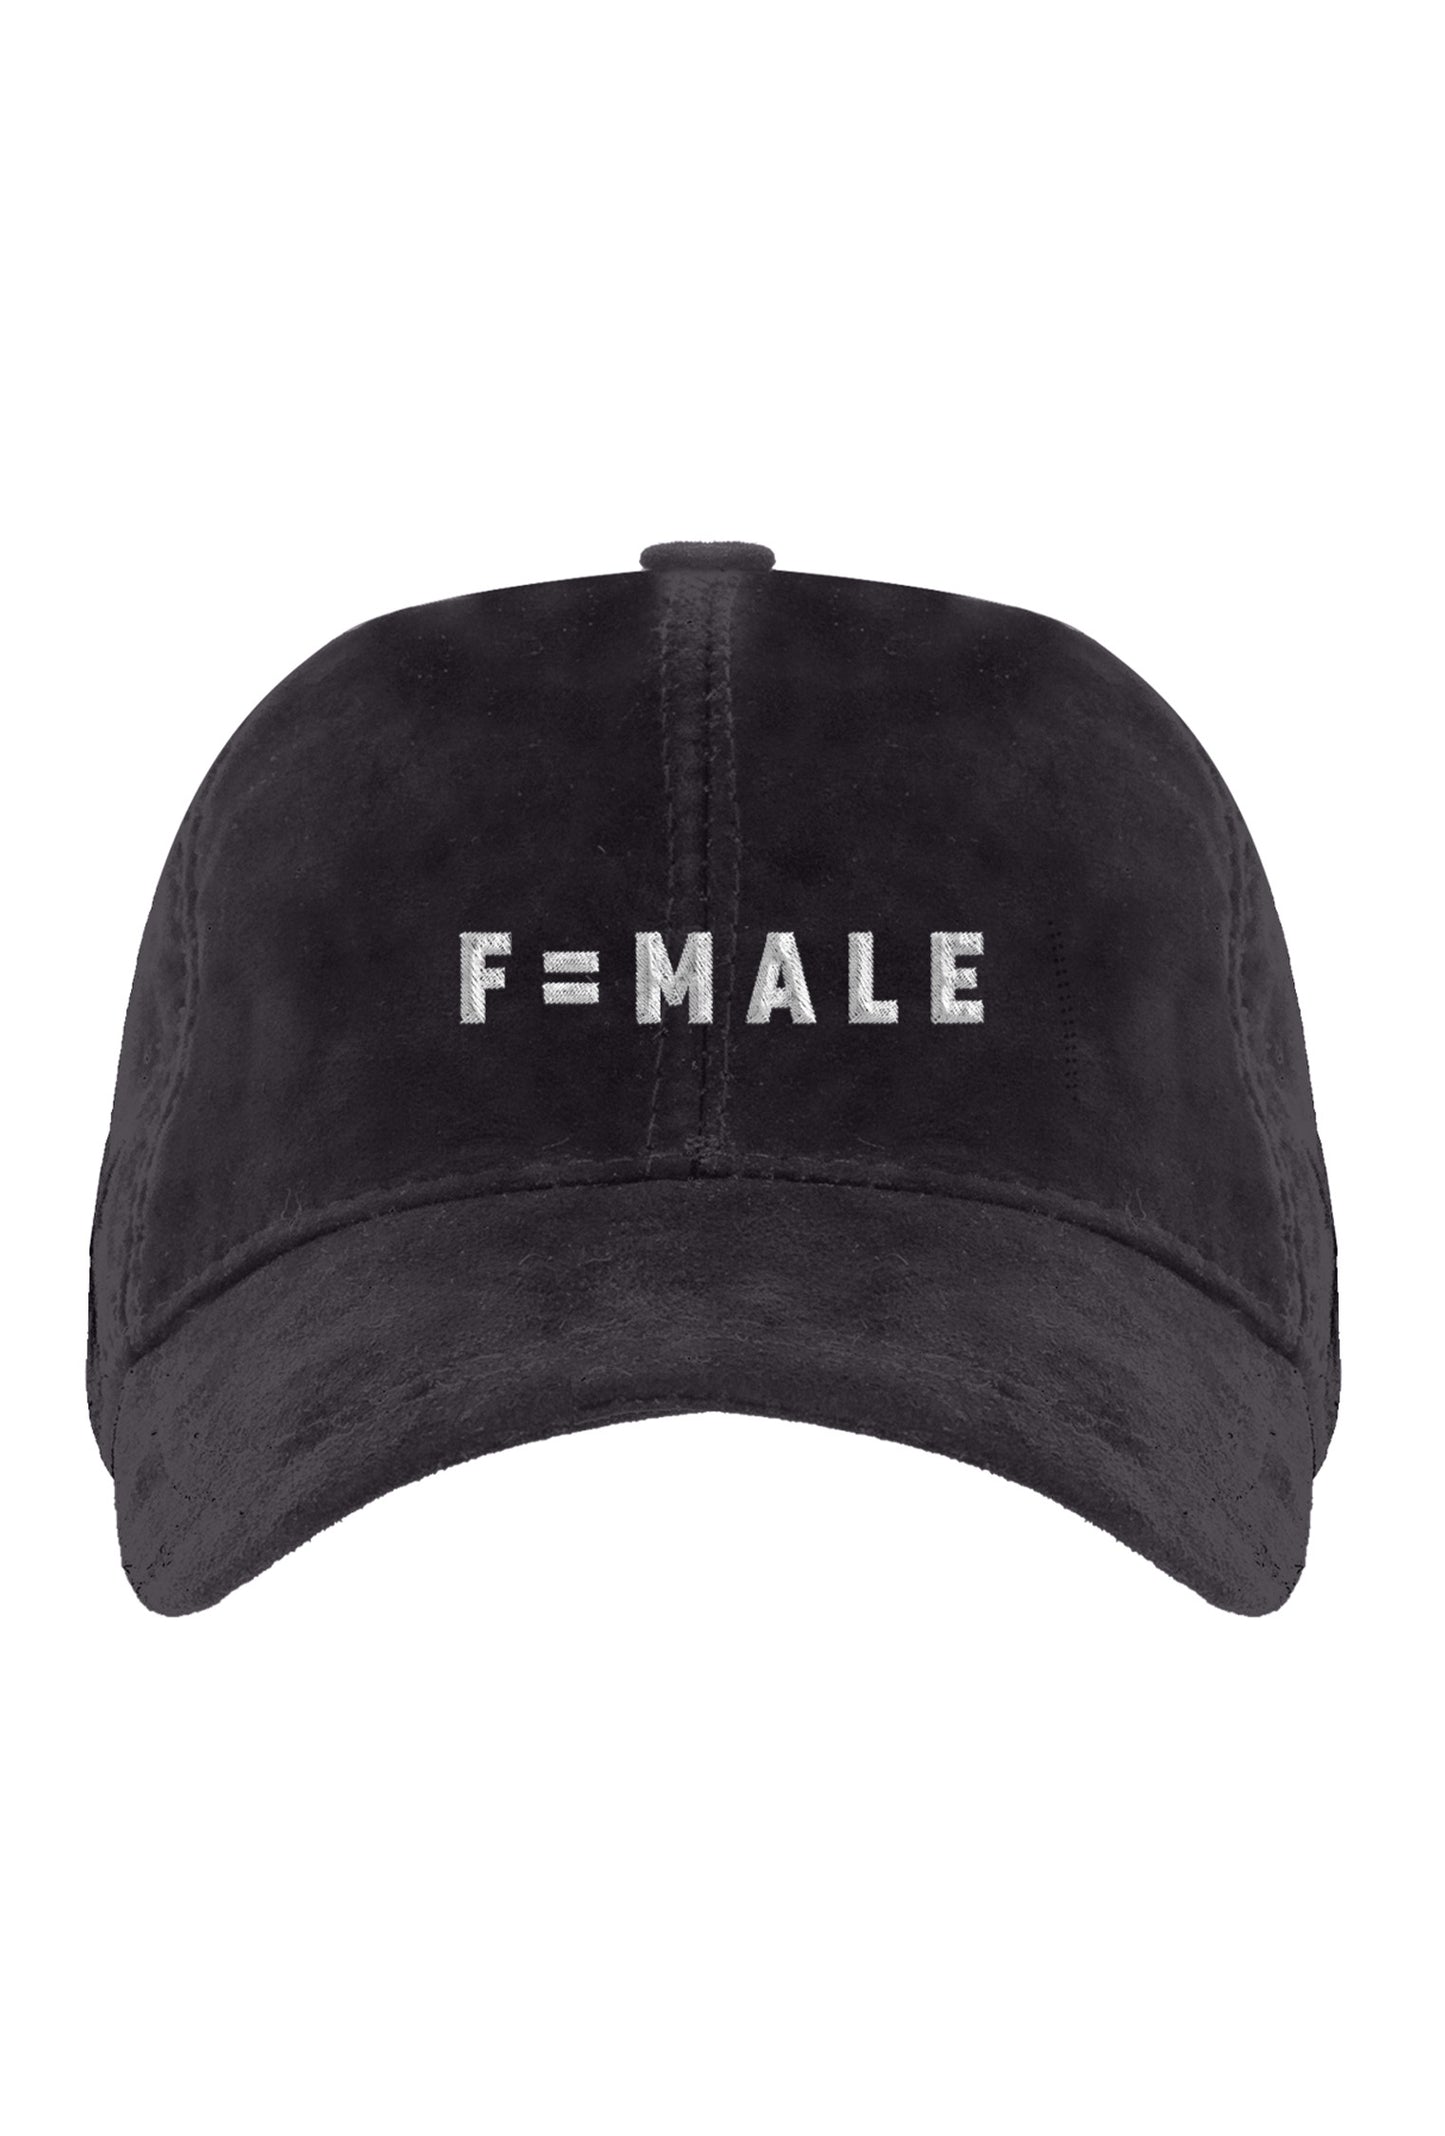 F=MALE – Bassigue TR